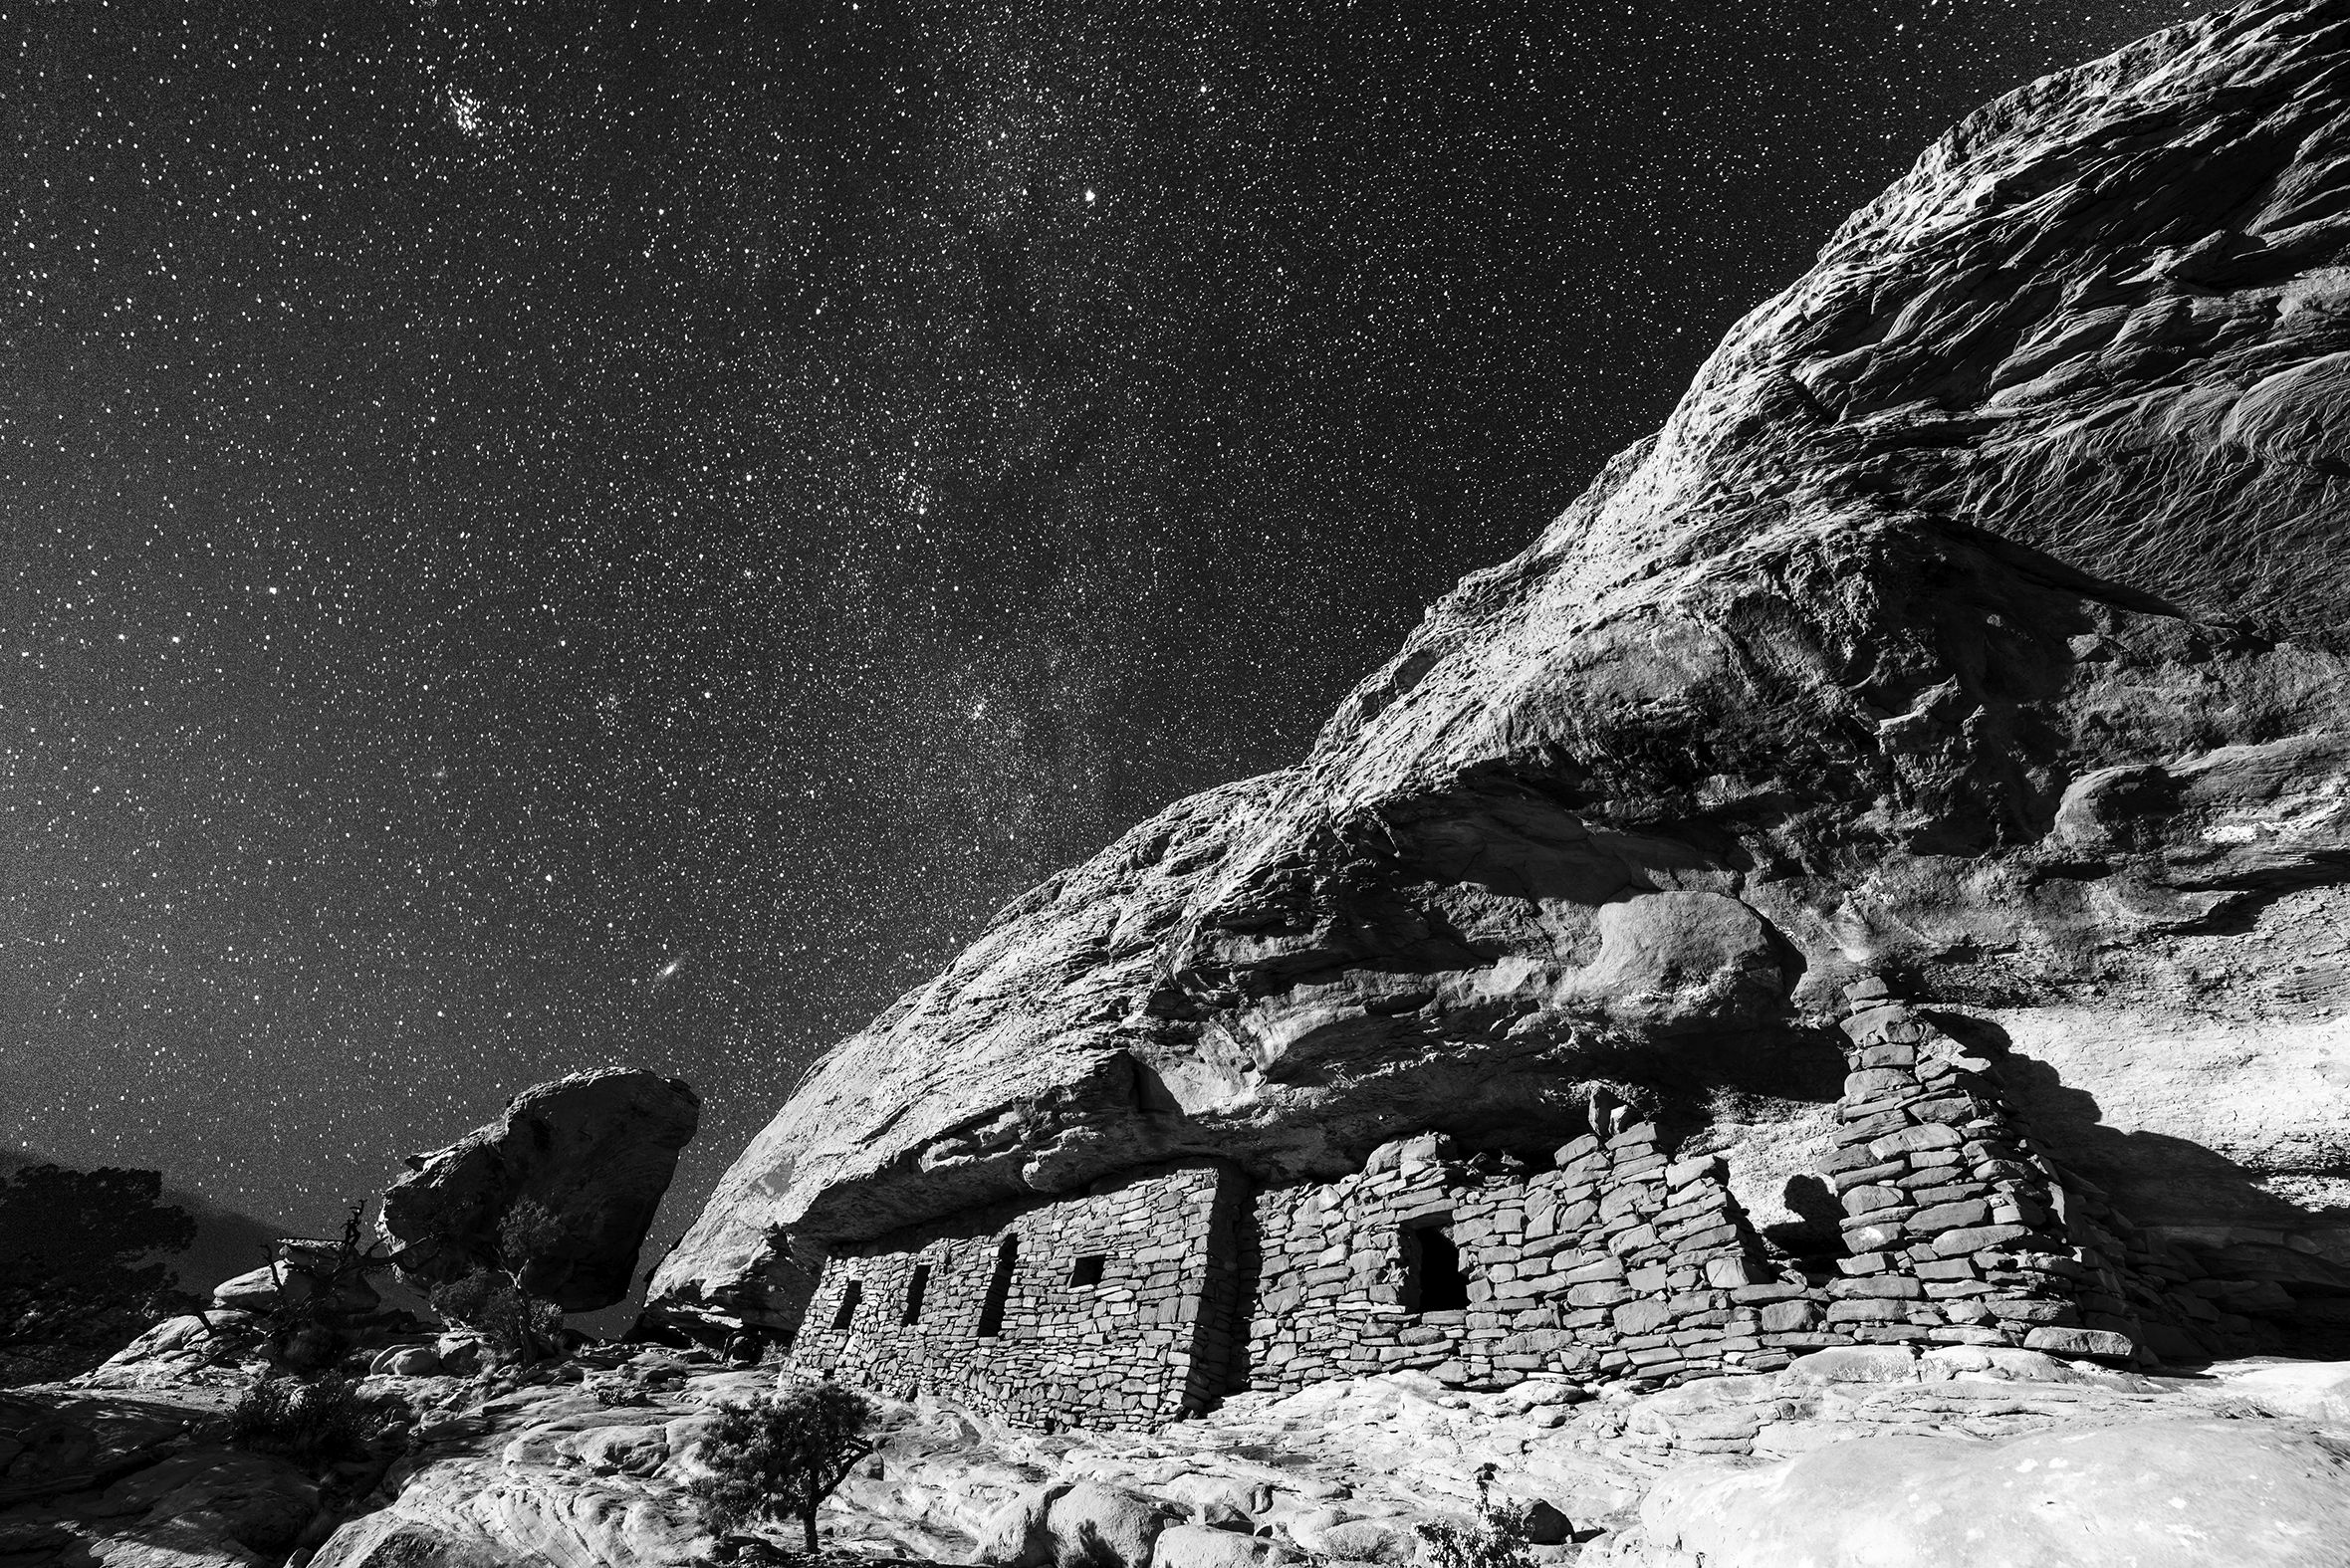 The photo titled “Ancient Nights: The Citadel” shows Anasazi ruins on a starry night. The ruins look like a dwelling of layered stones with several windows built into the side of a cliff under an overhang.